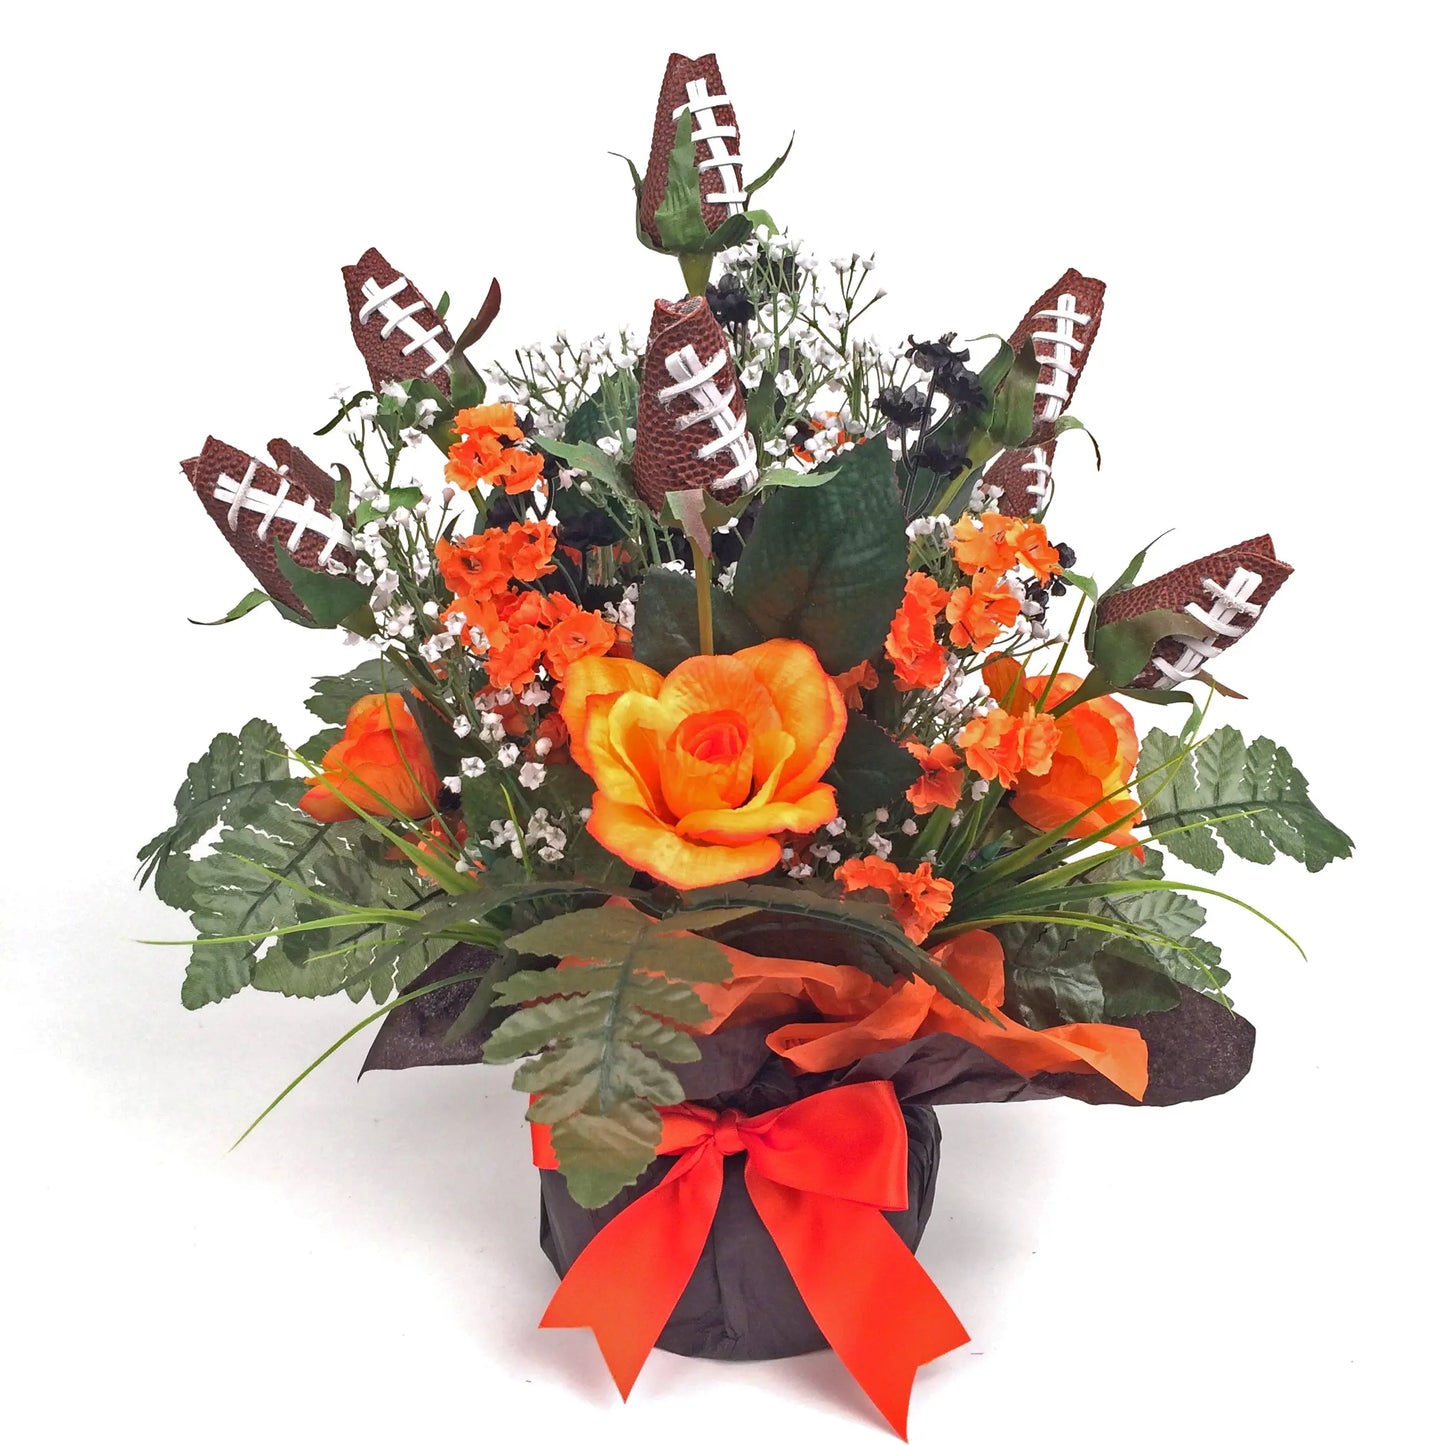 Football Rose Centerpiece Arrangement - Customize Color Theme for School or Team Sports Roses  